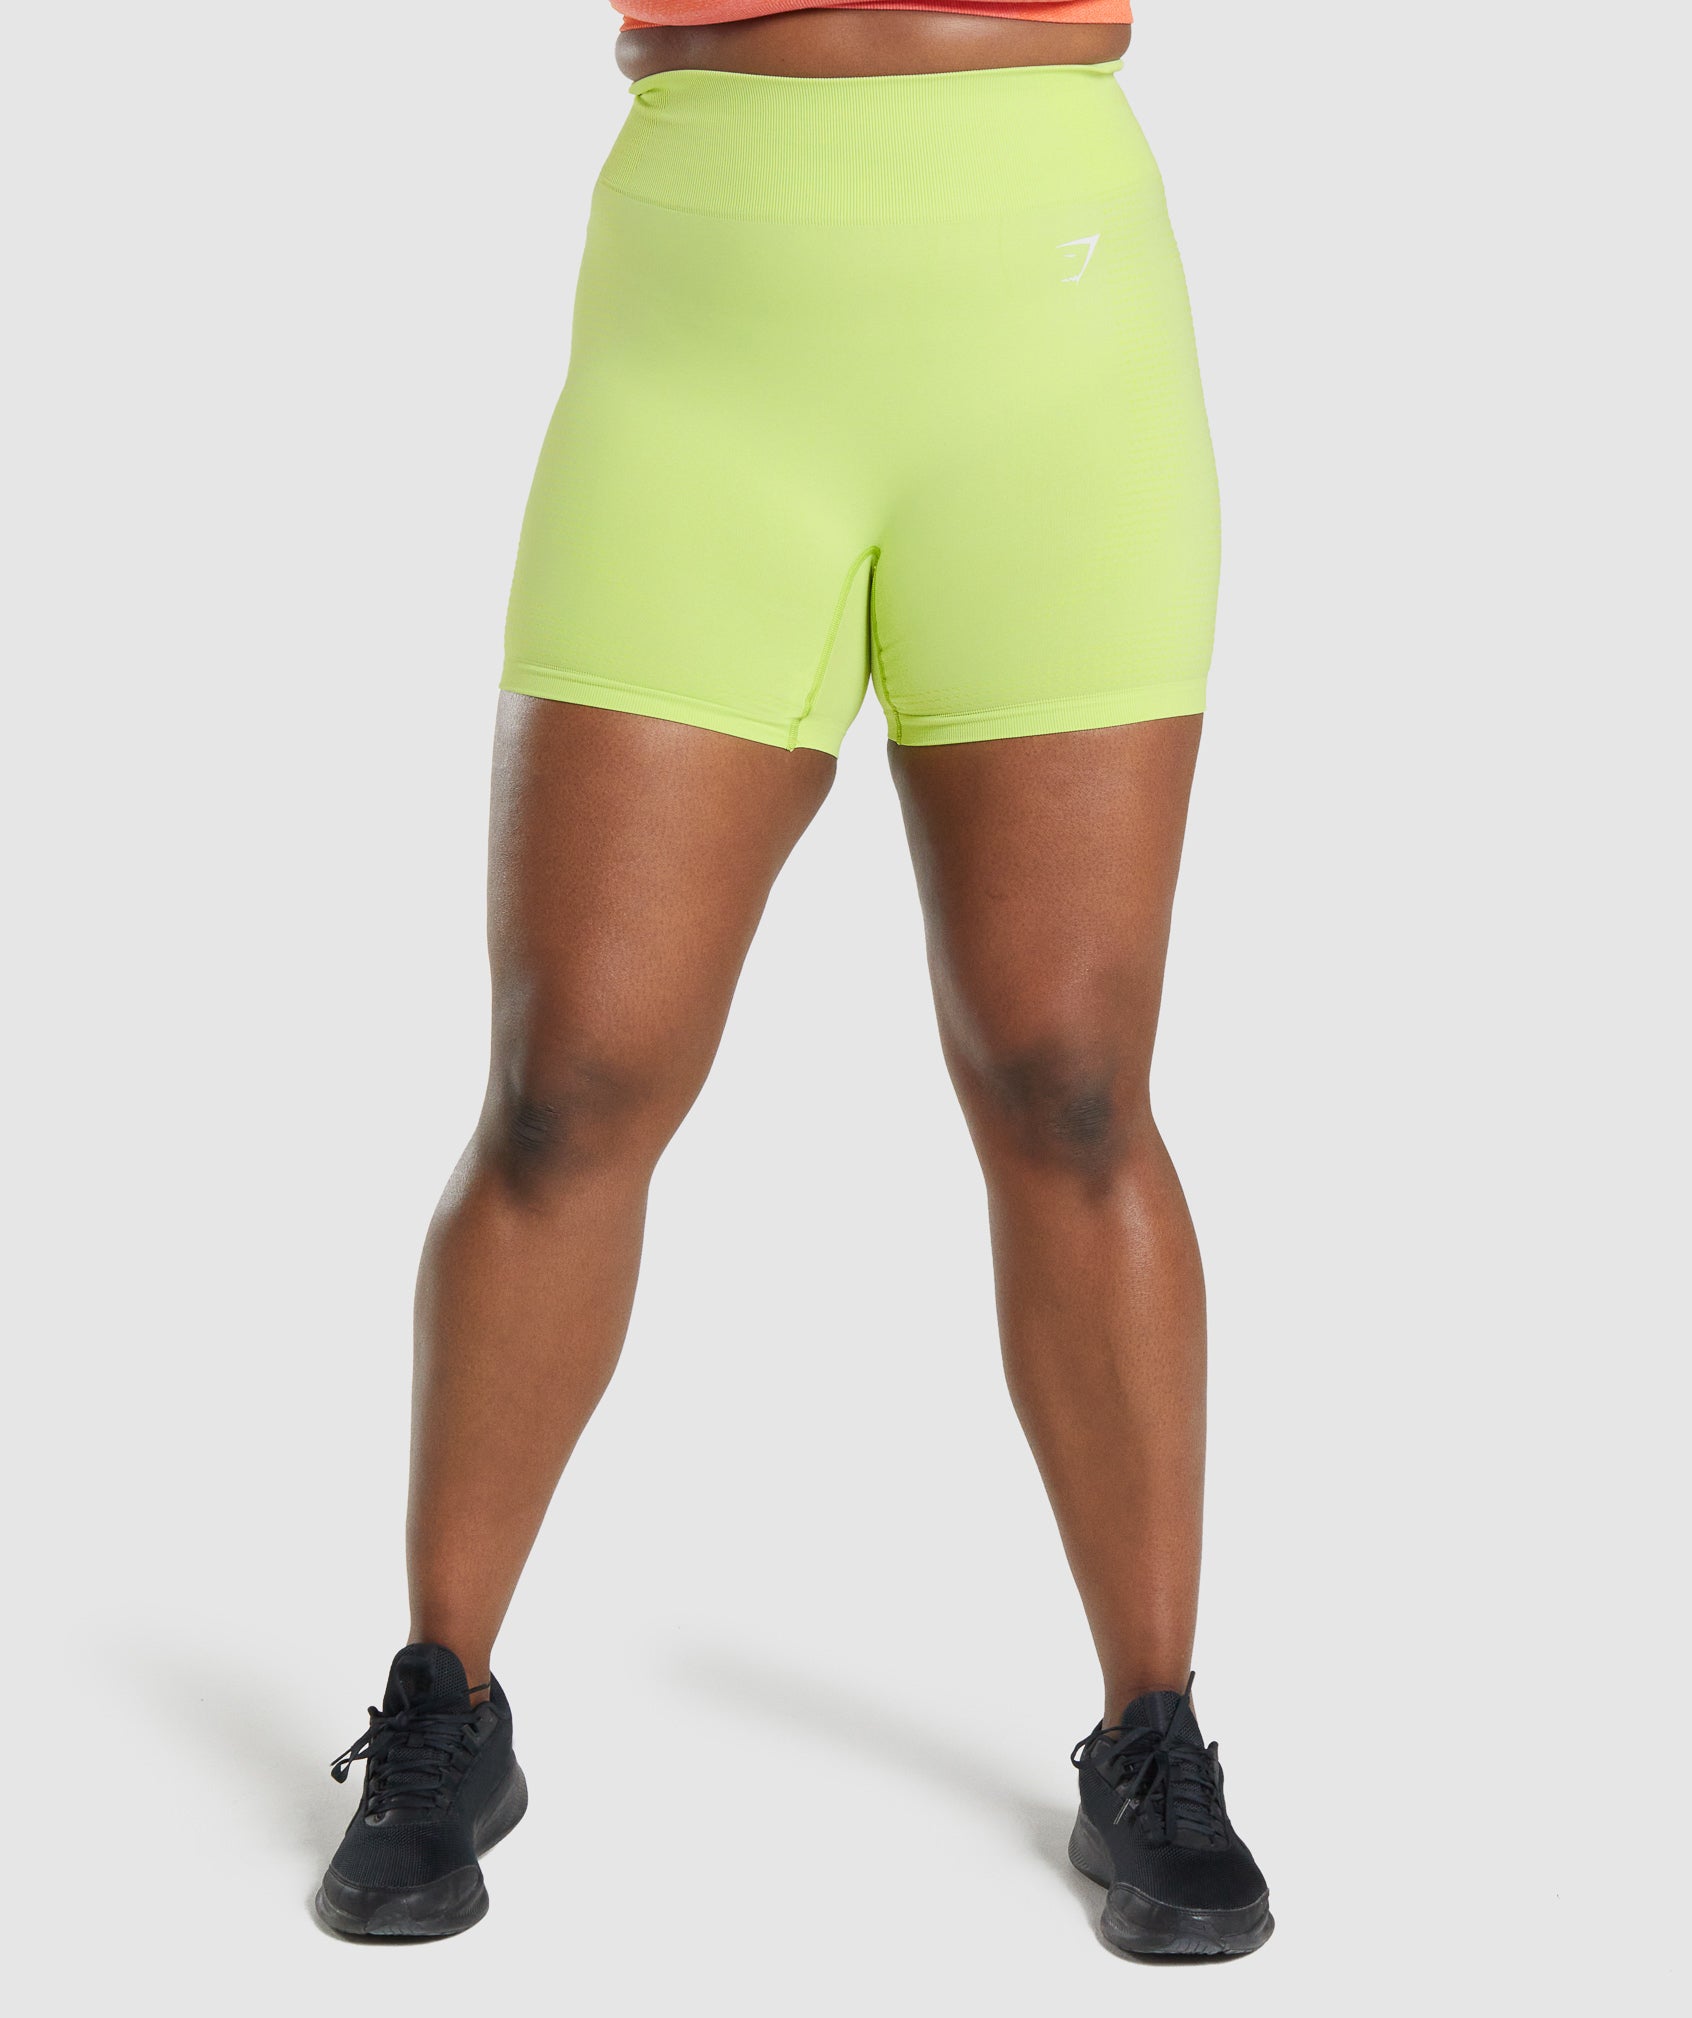 Vital Seamless 2.0 Shorts in {{variantColor} is out of stock